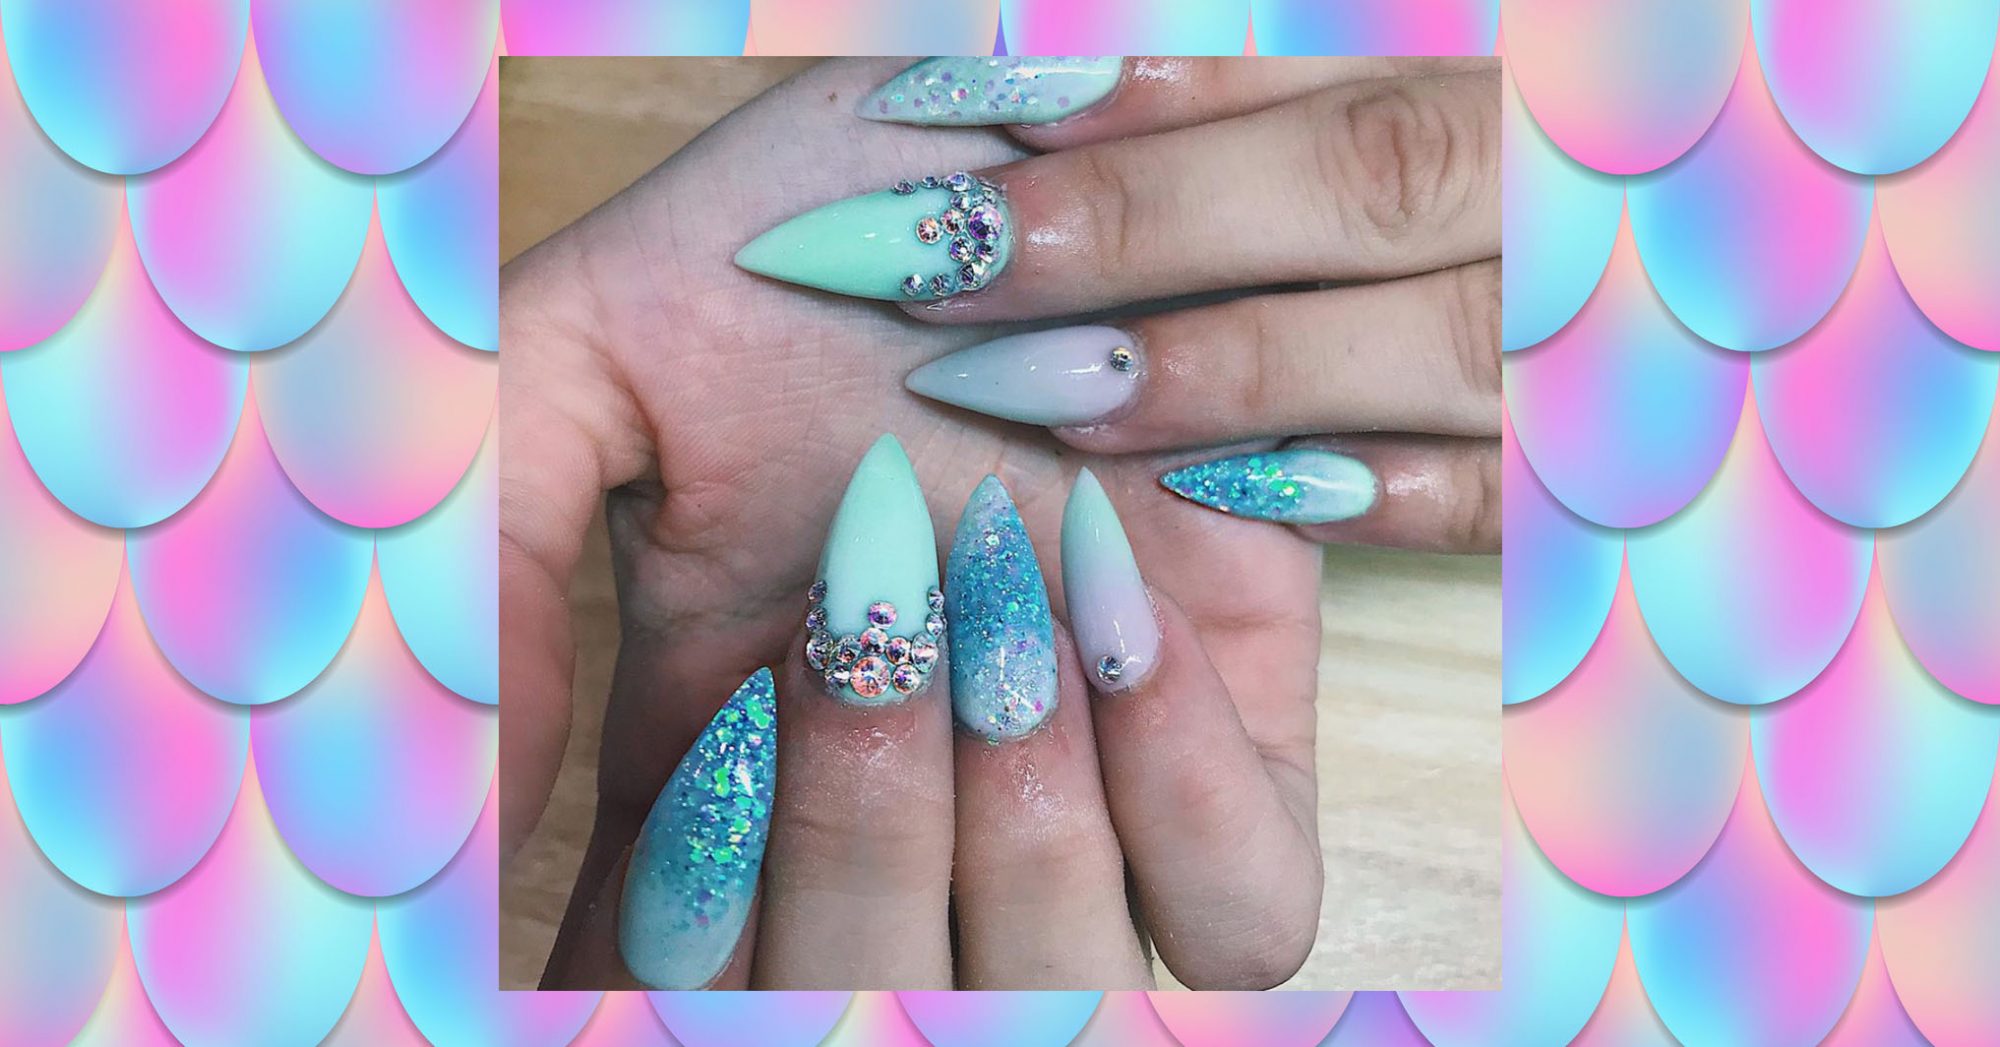 AILY NAIL - 🧜‍♀️Ariel🐚 Hand painted on GelX extension Designed by  #ailynailsg #acyrlicnails #nails #manicure #nailsofinstagram #nailart  #explore #instagram #instagood #trending #naildesigns #nailstyle #viral  #naildesign #nailartist #naillove ...